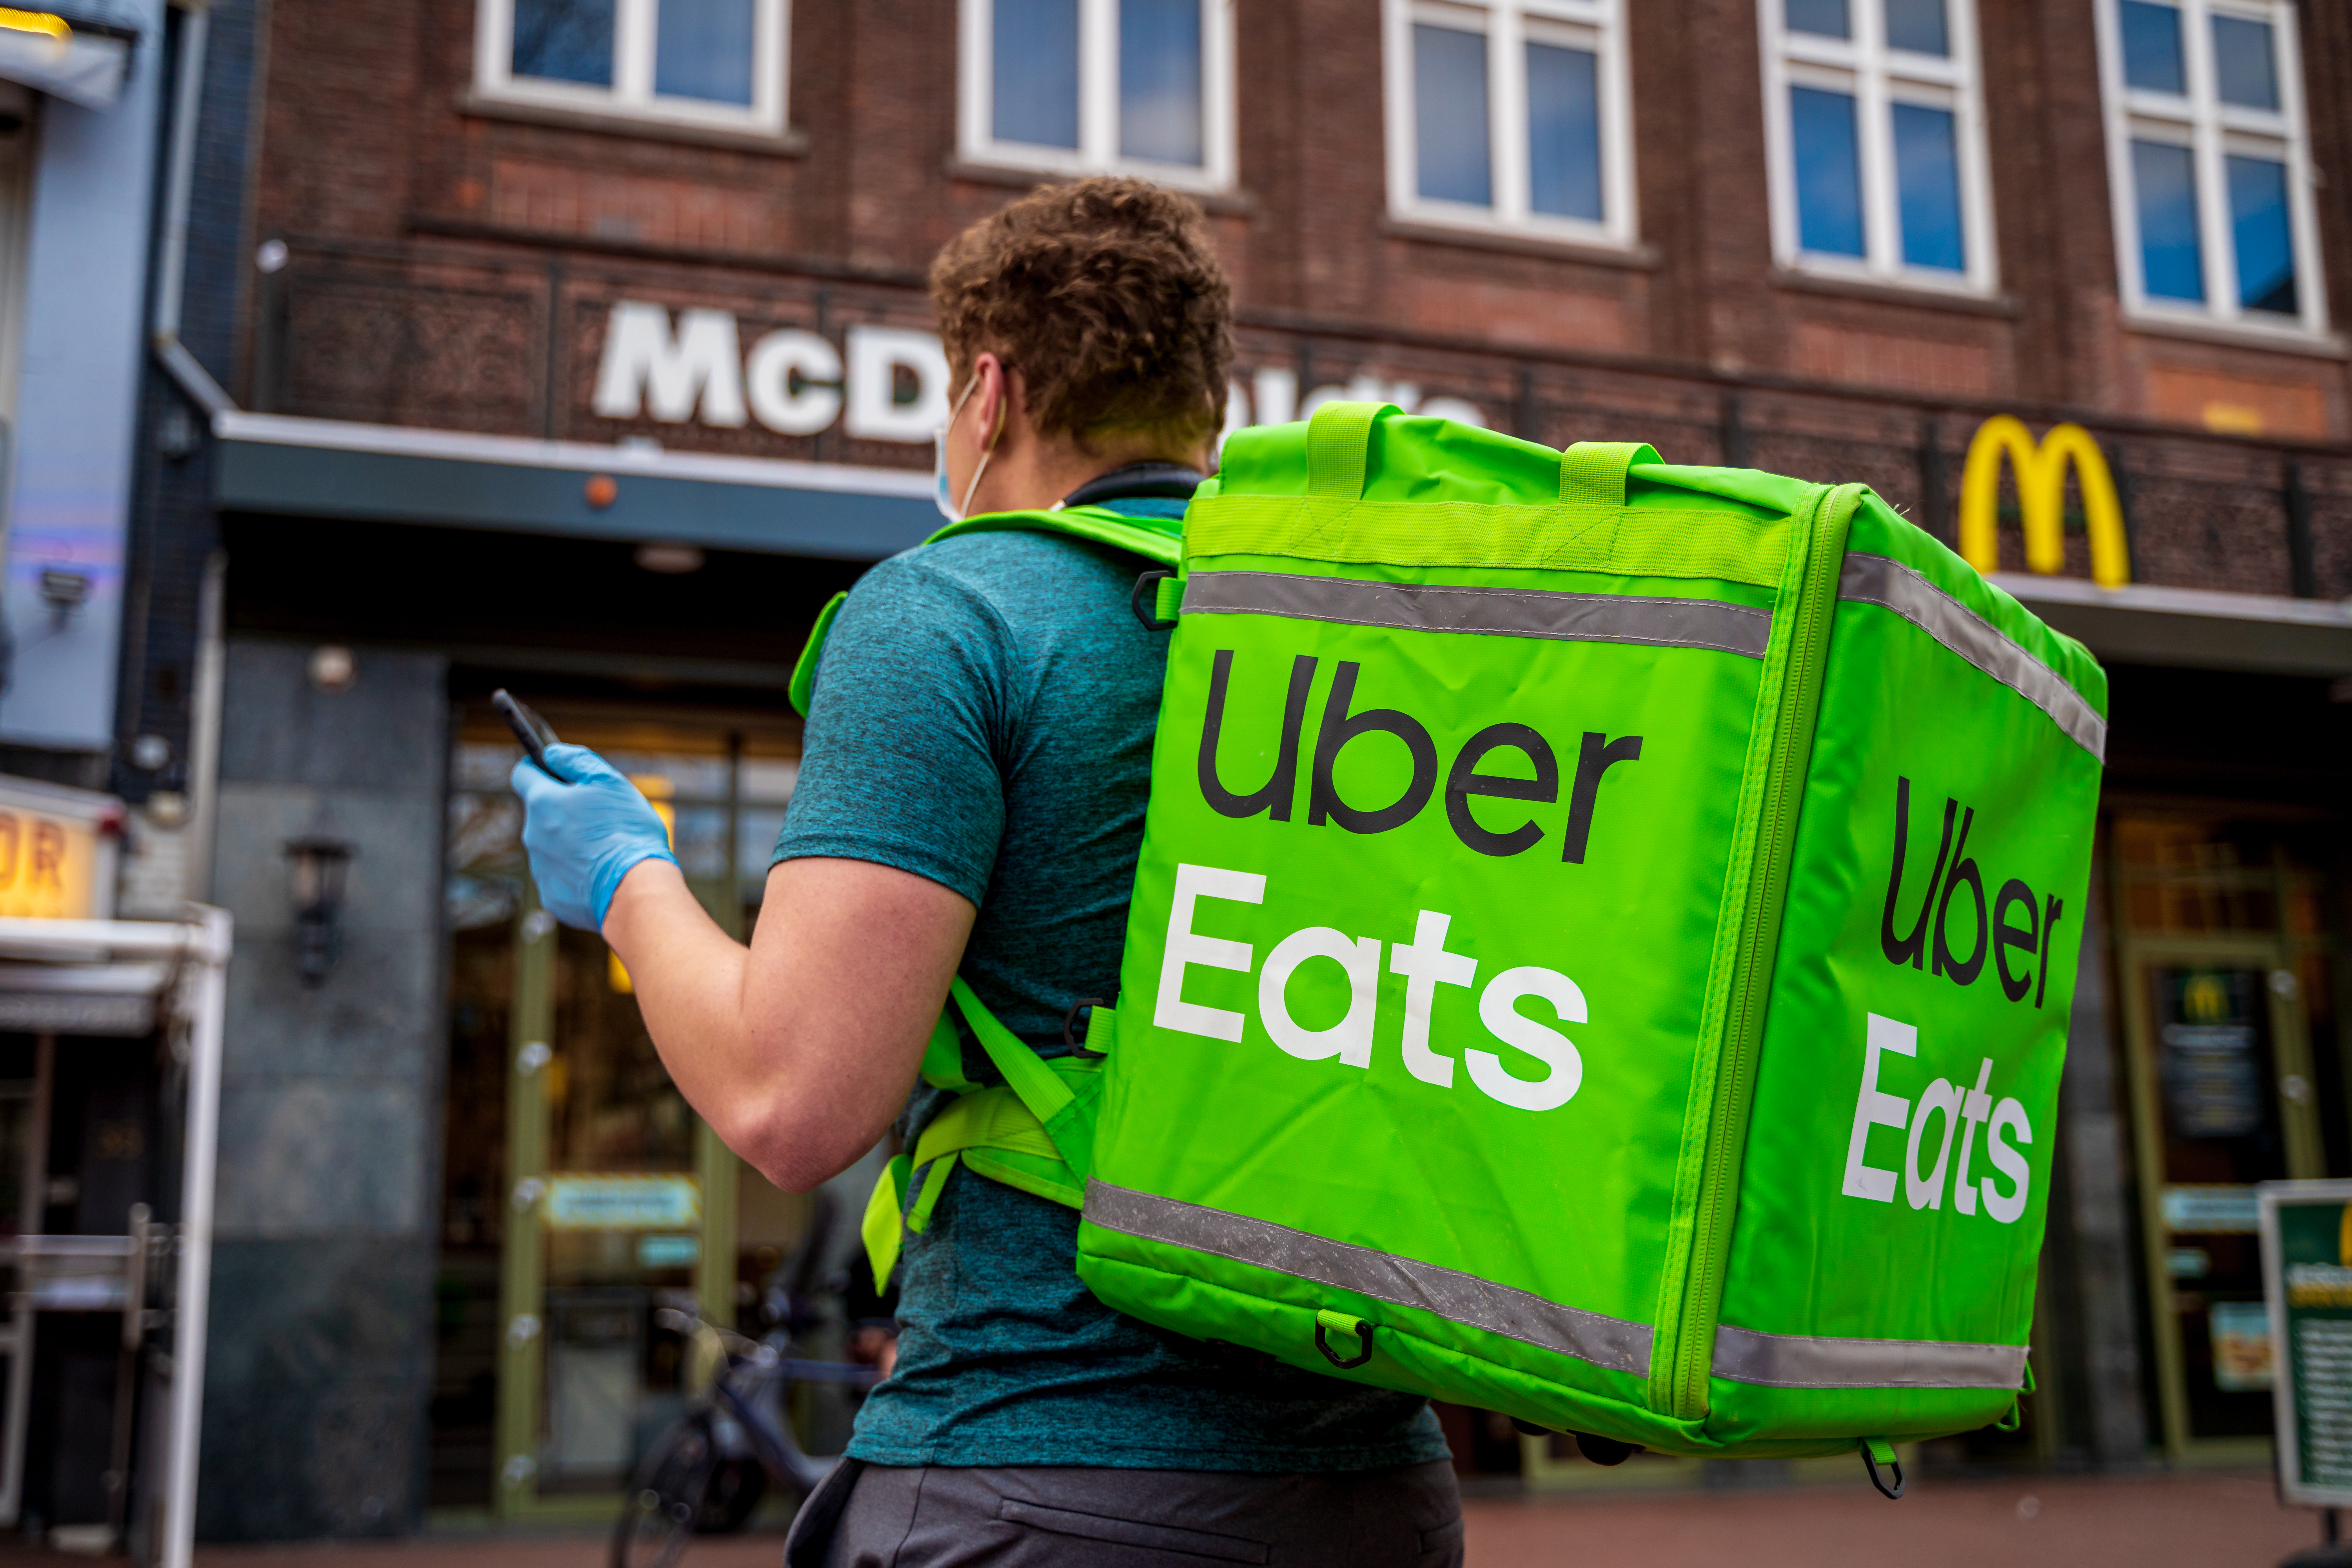 Uber: Where Transportation and Food Service Market Research Meet